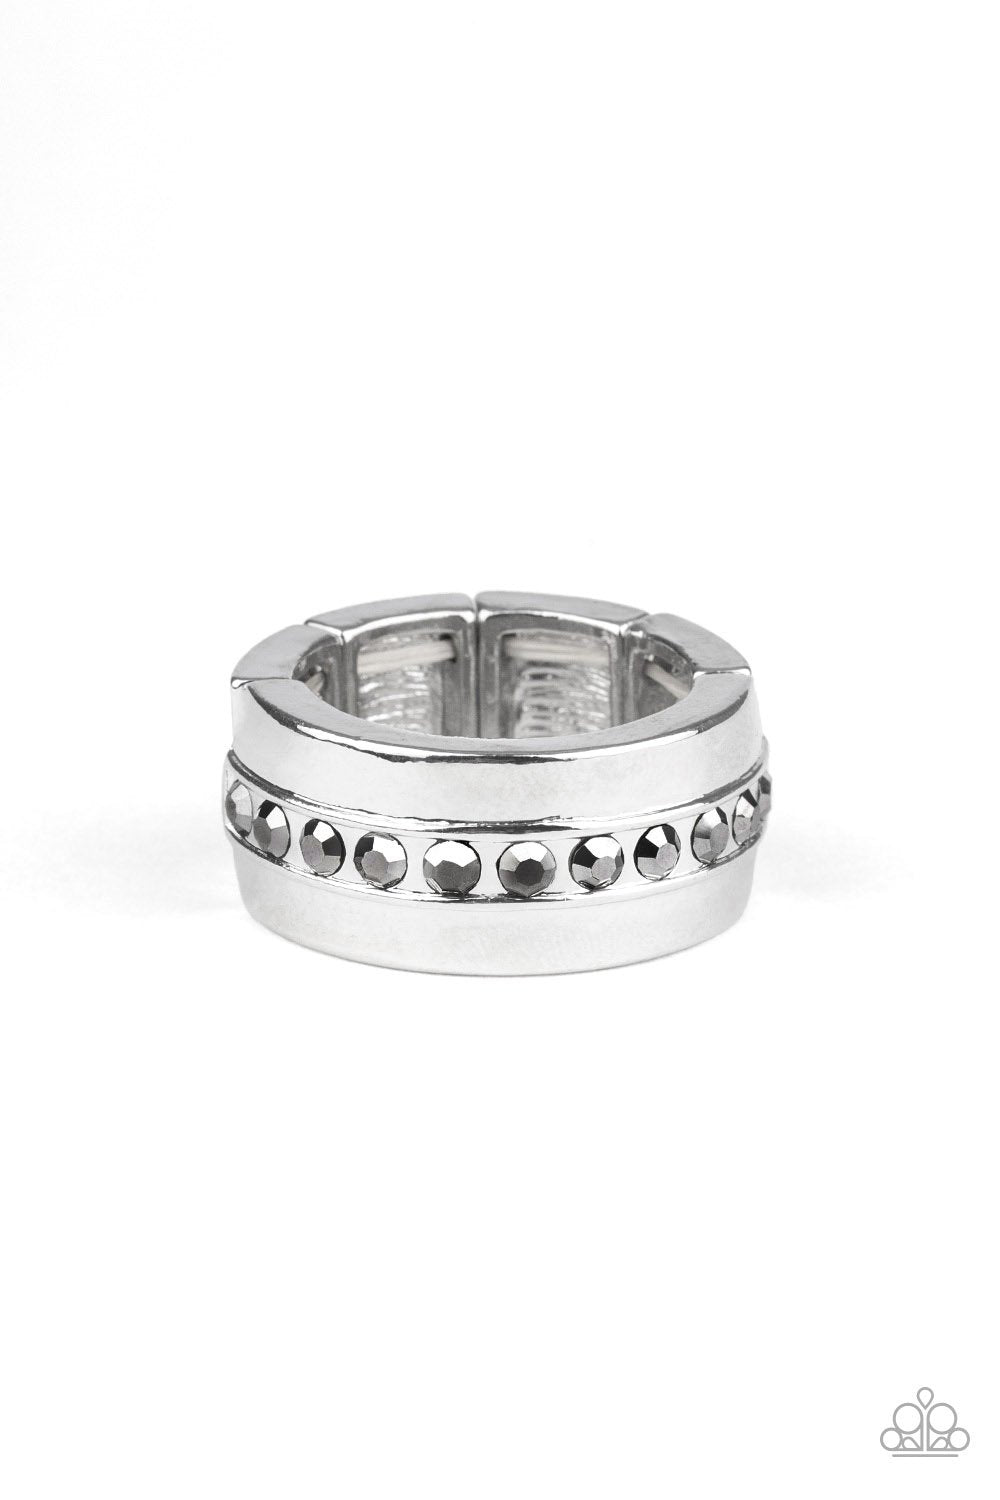 Reigning Champ Silver Men's Ring - Paparazzi Accessories Convention Exclusive-CarasShop.com - $5 Jewelry by Cara Jewels